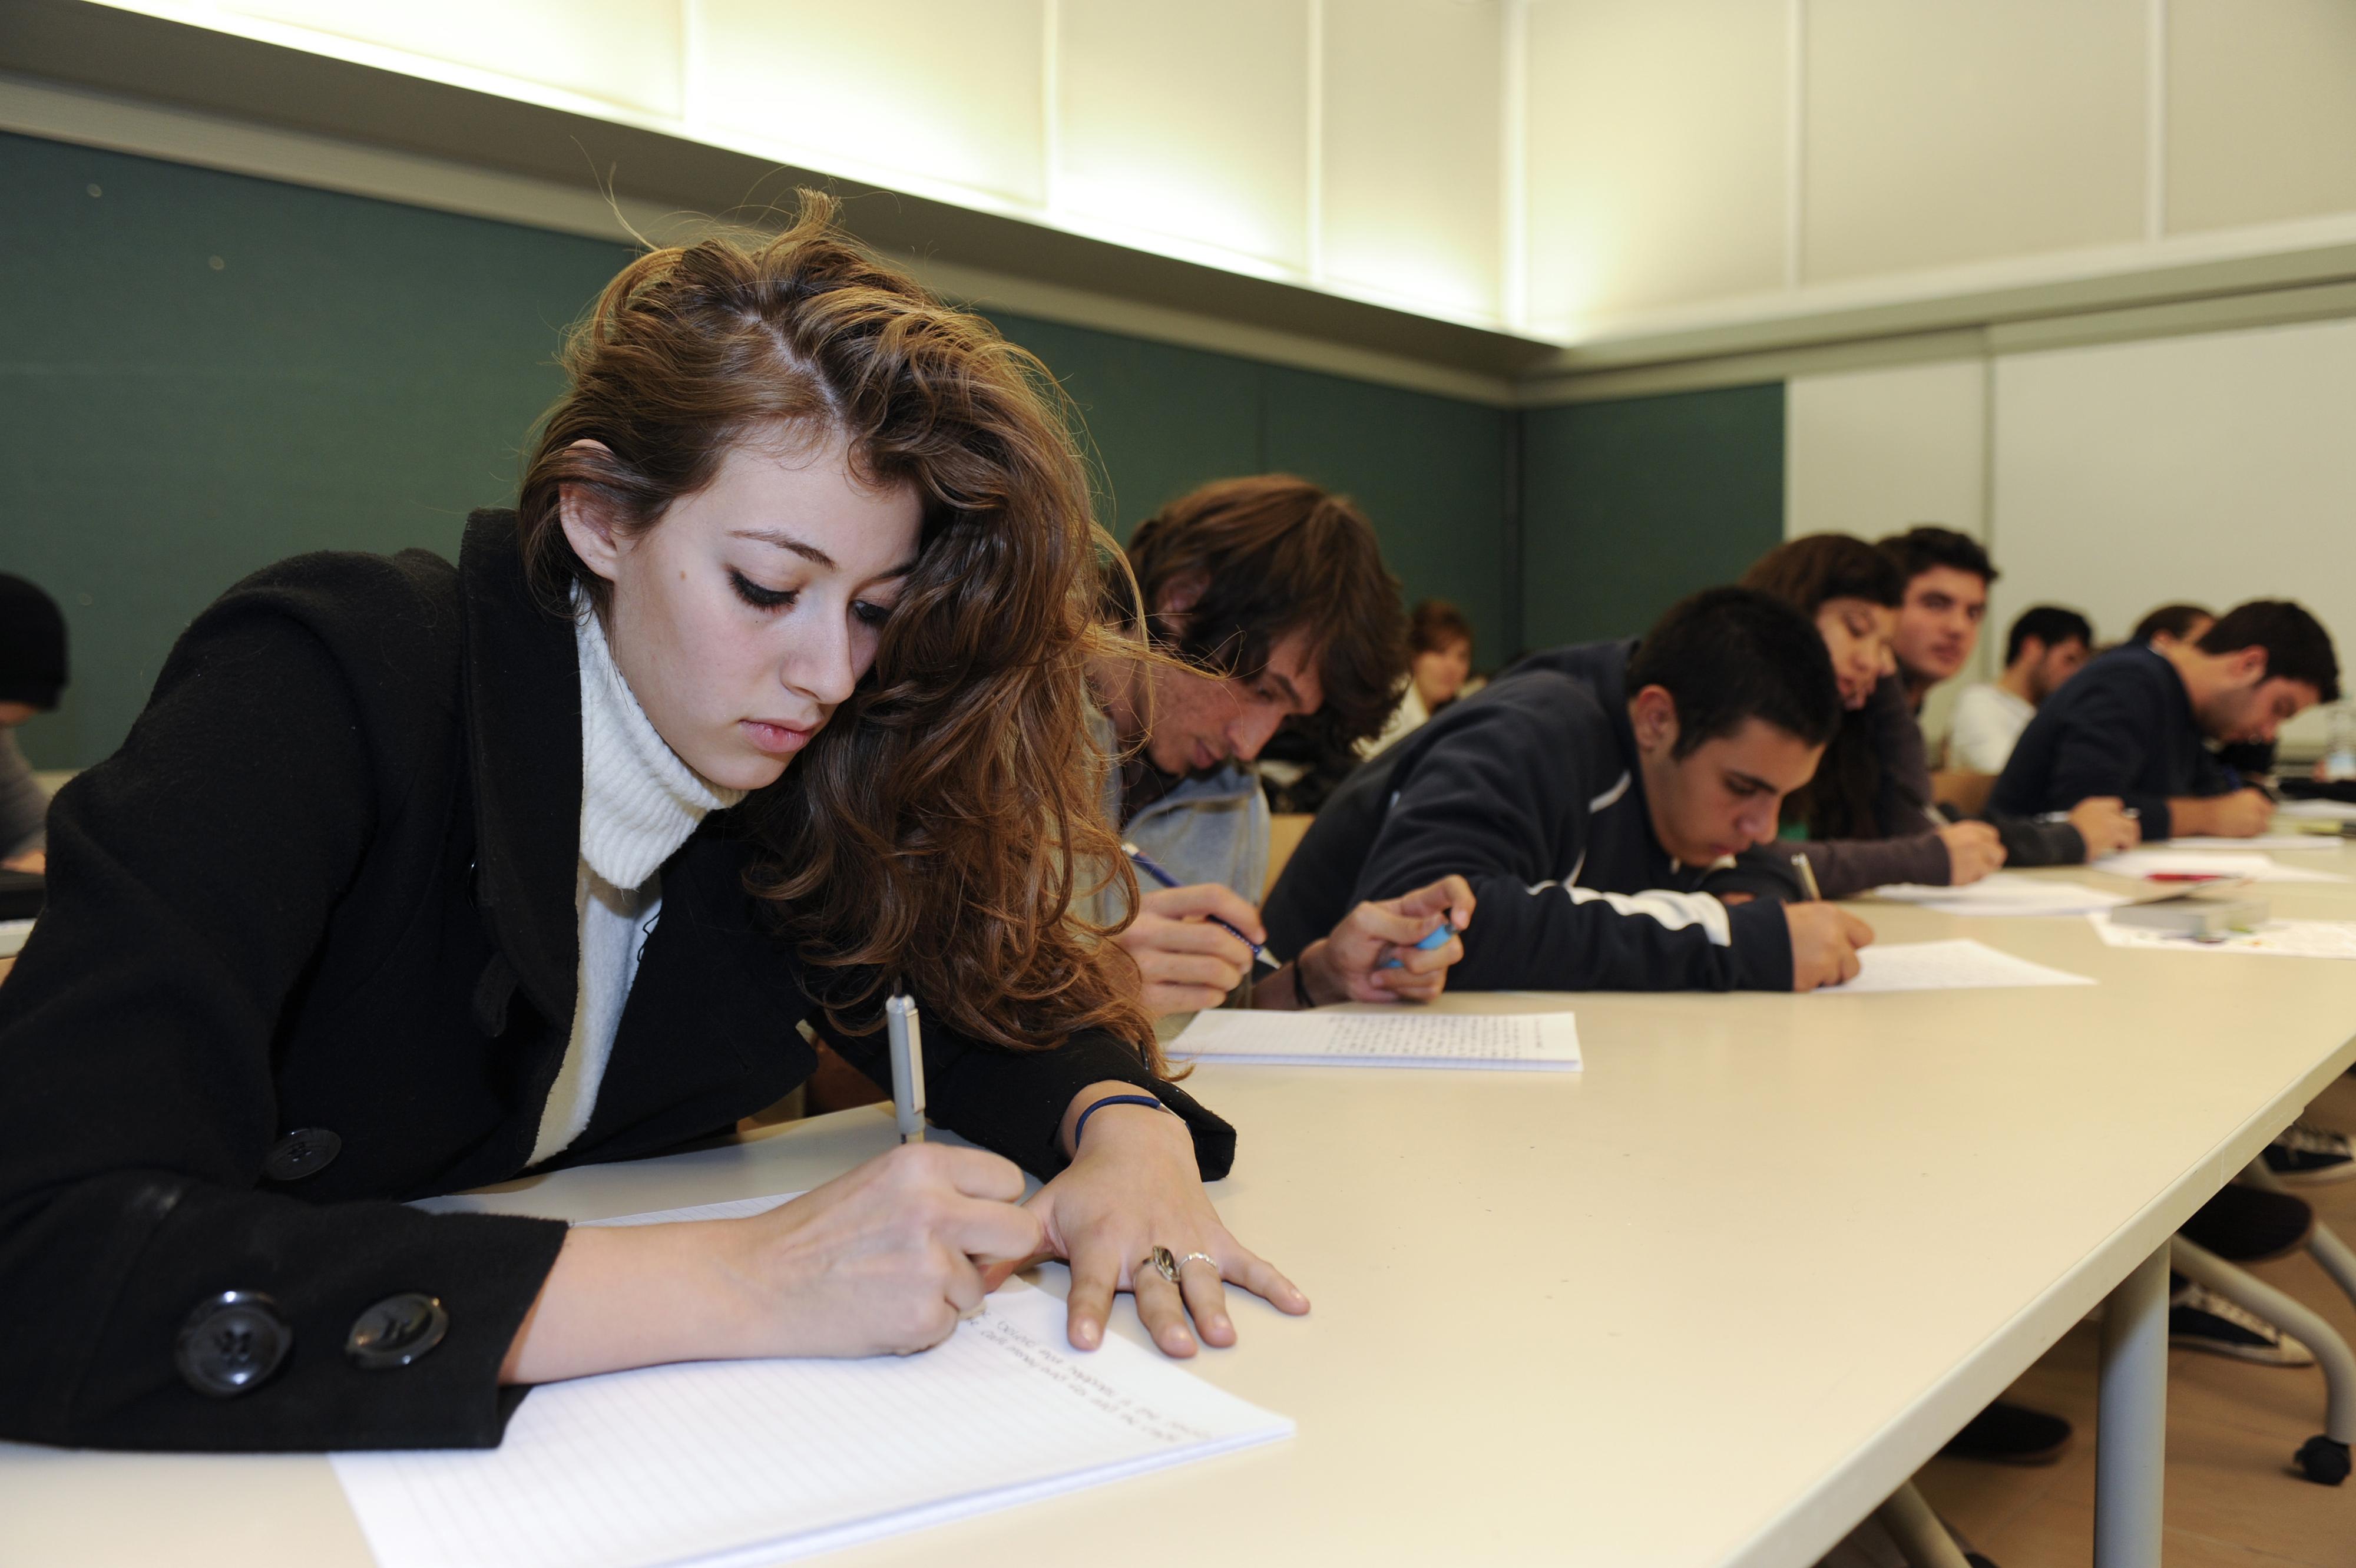 Students studying in class